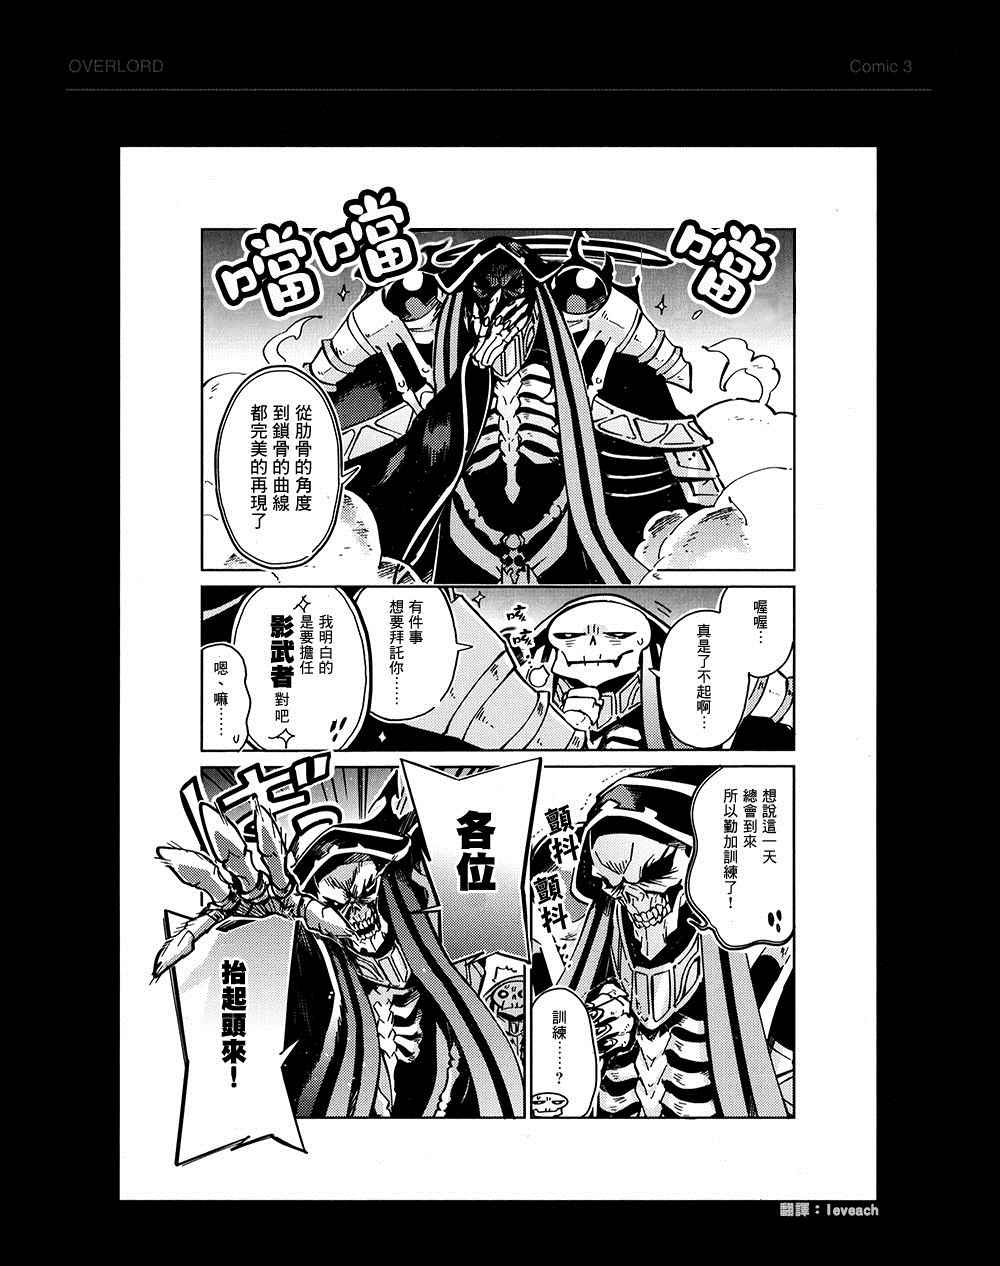 《OVERLORD》漫画 BD附录05